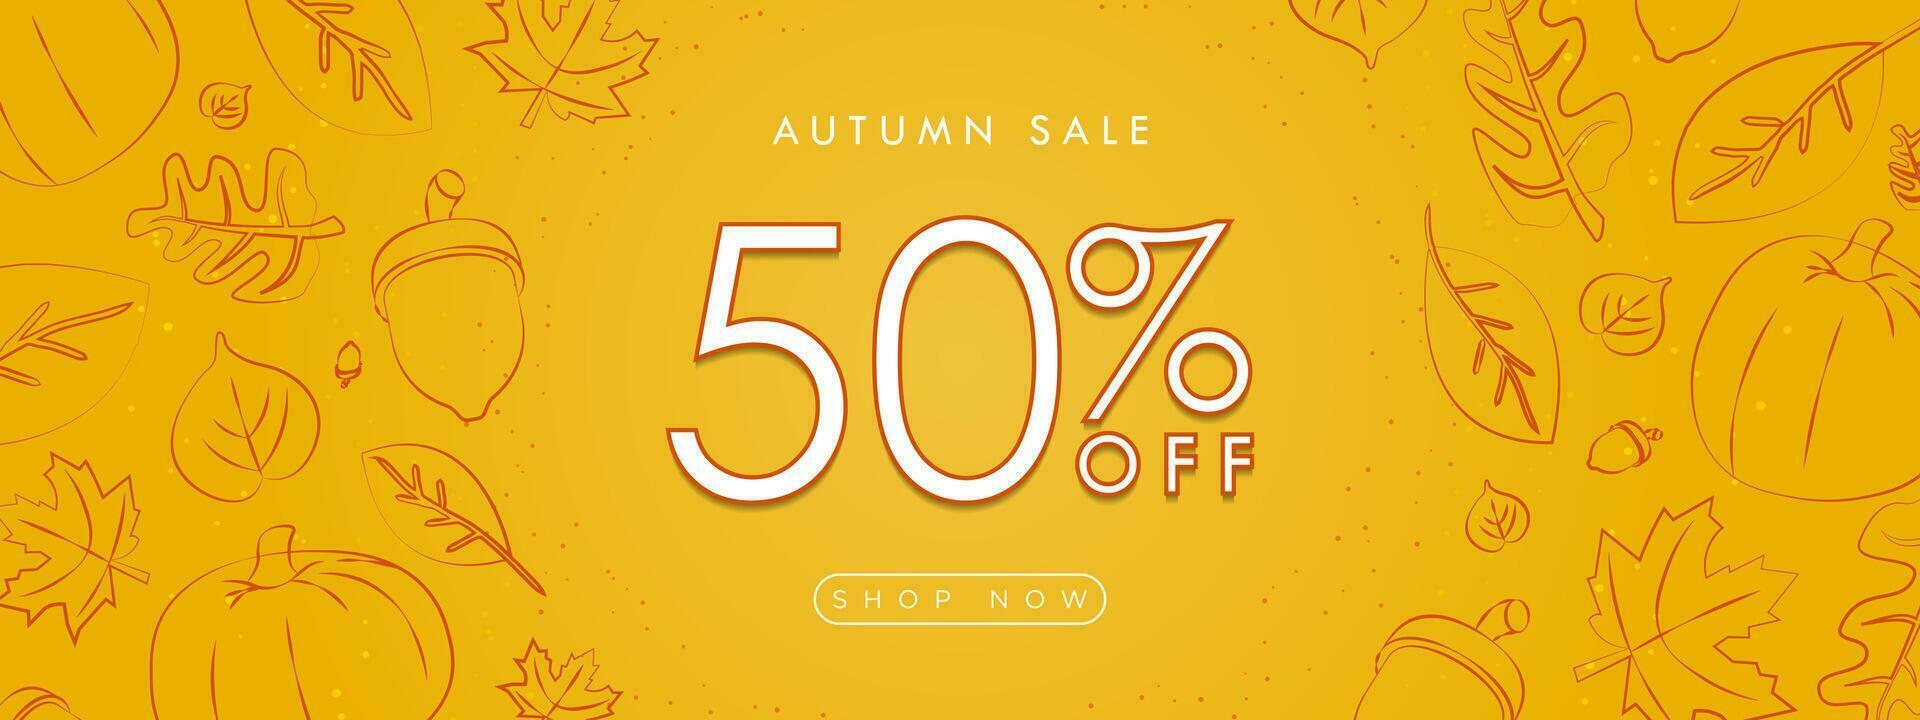 Autumn Sale Up to 50 percent off Banner with Shop Now. Hand drawn autumn elements such as leaves, maple, acorn, and pumpkin. Editable Vector Illustration.